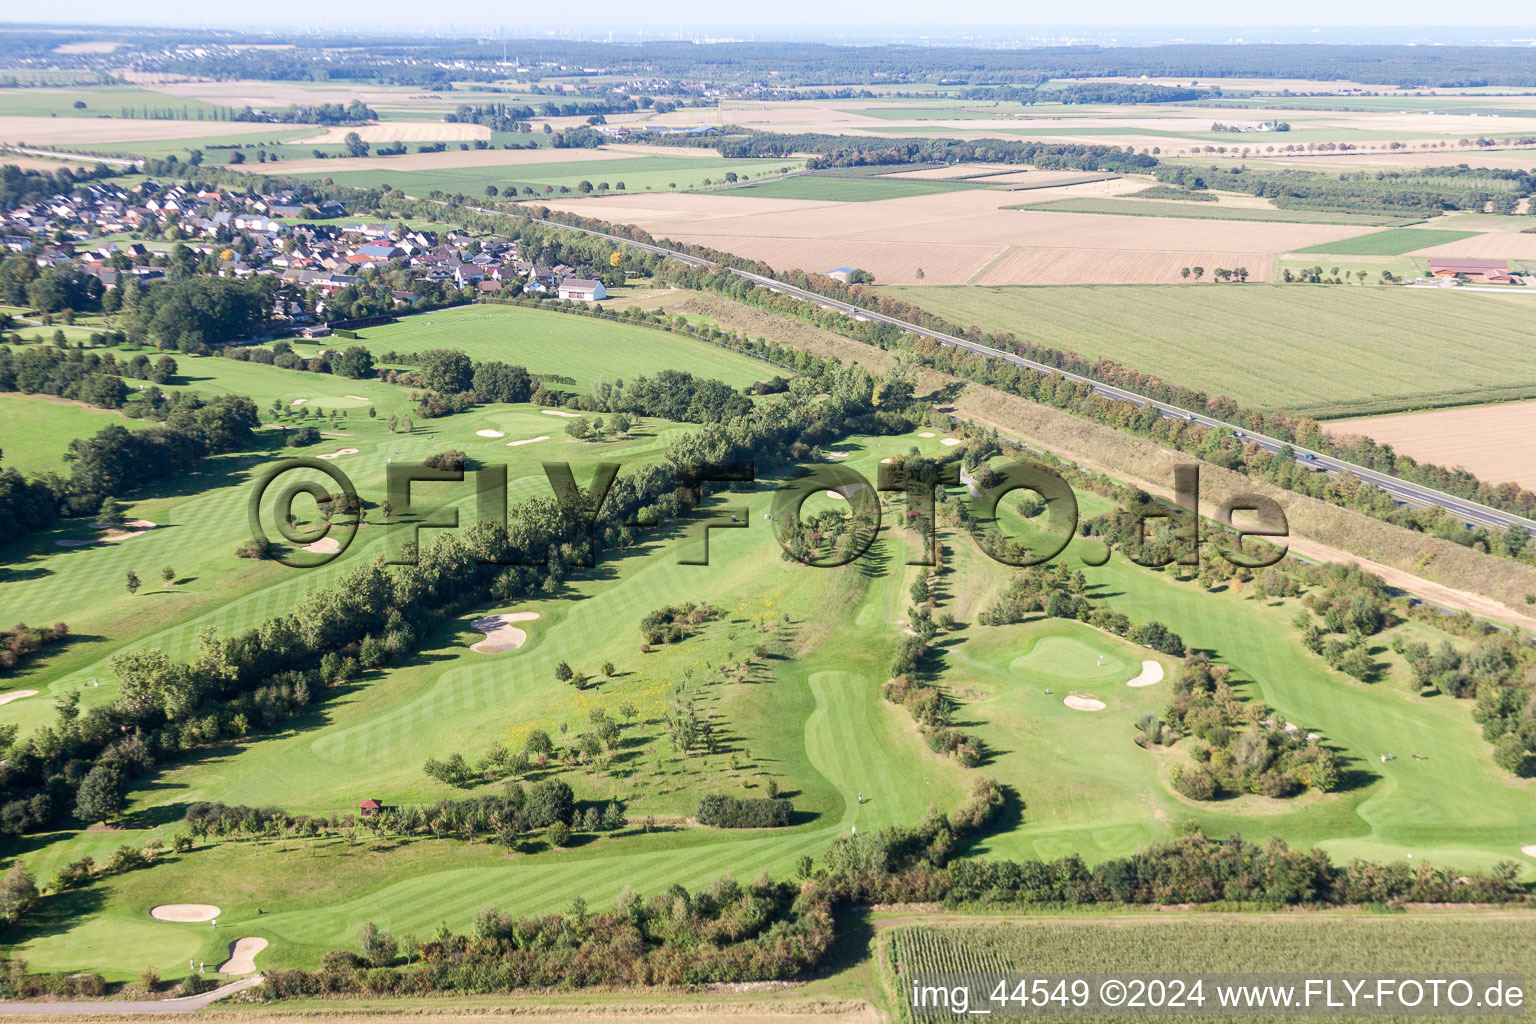 Aerial view of Grounds of the Golf course at Golf Club Schloss Miel in the district Miel in Swisttal in the state North Rhine-Westphalia, Germany